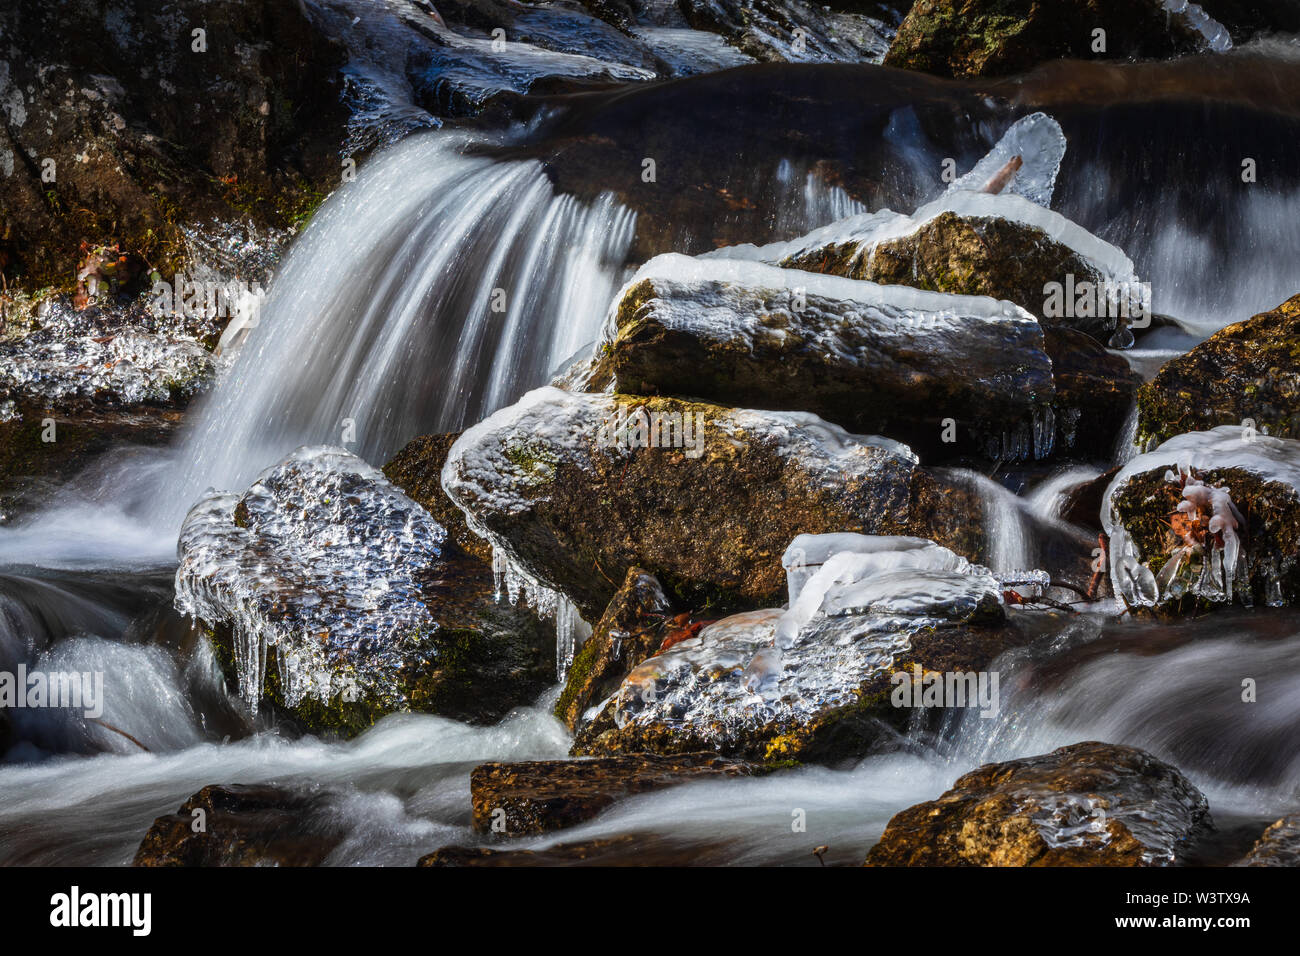 Close up view of an icy Tom's Creek below the falls near Marion, North Carolina, USA. The 60-foot falls are located on Tom's Creek, near Marion, NC. T Stock Photo